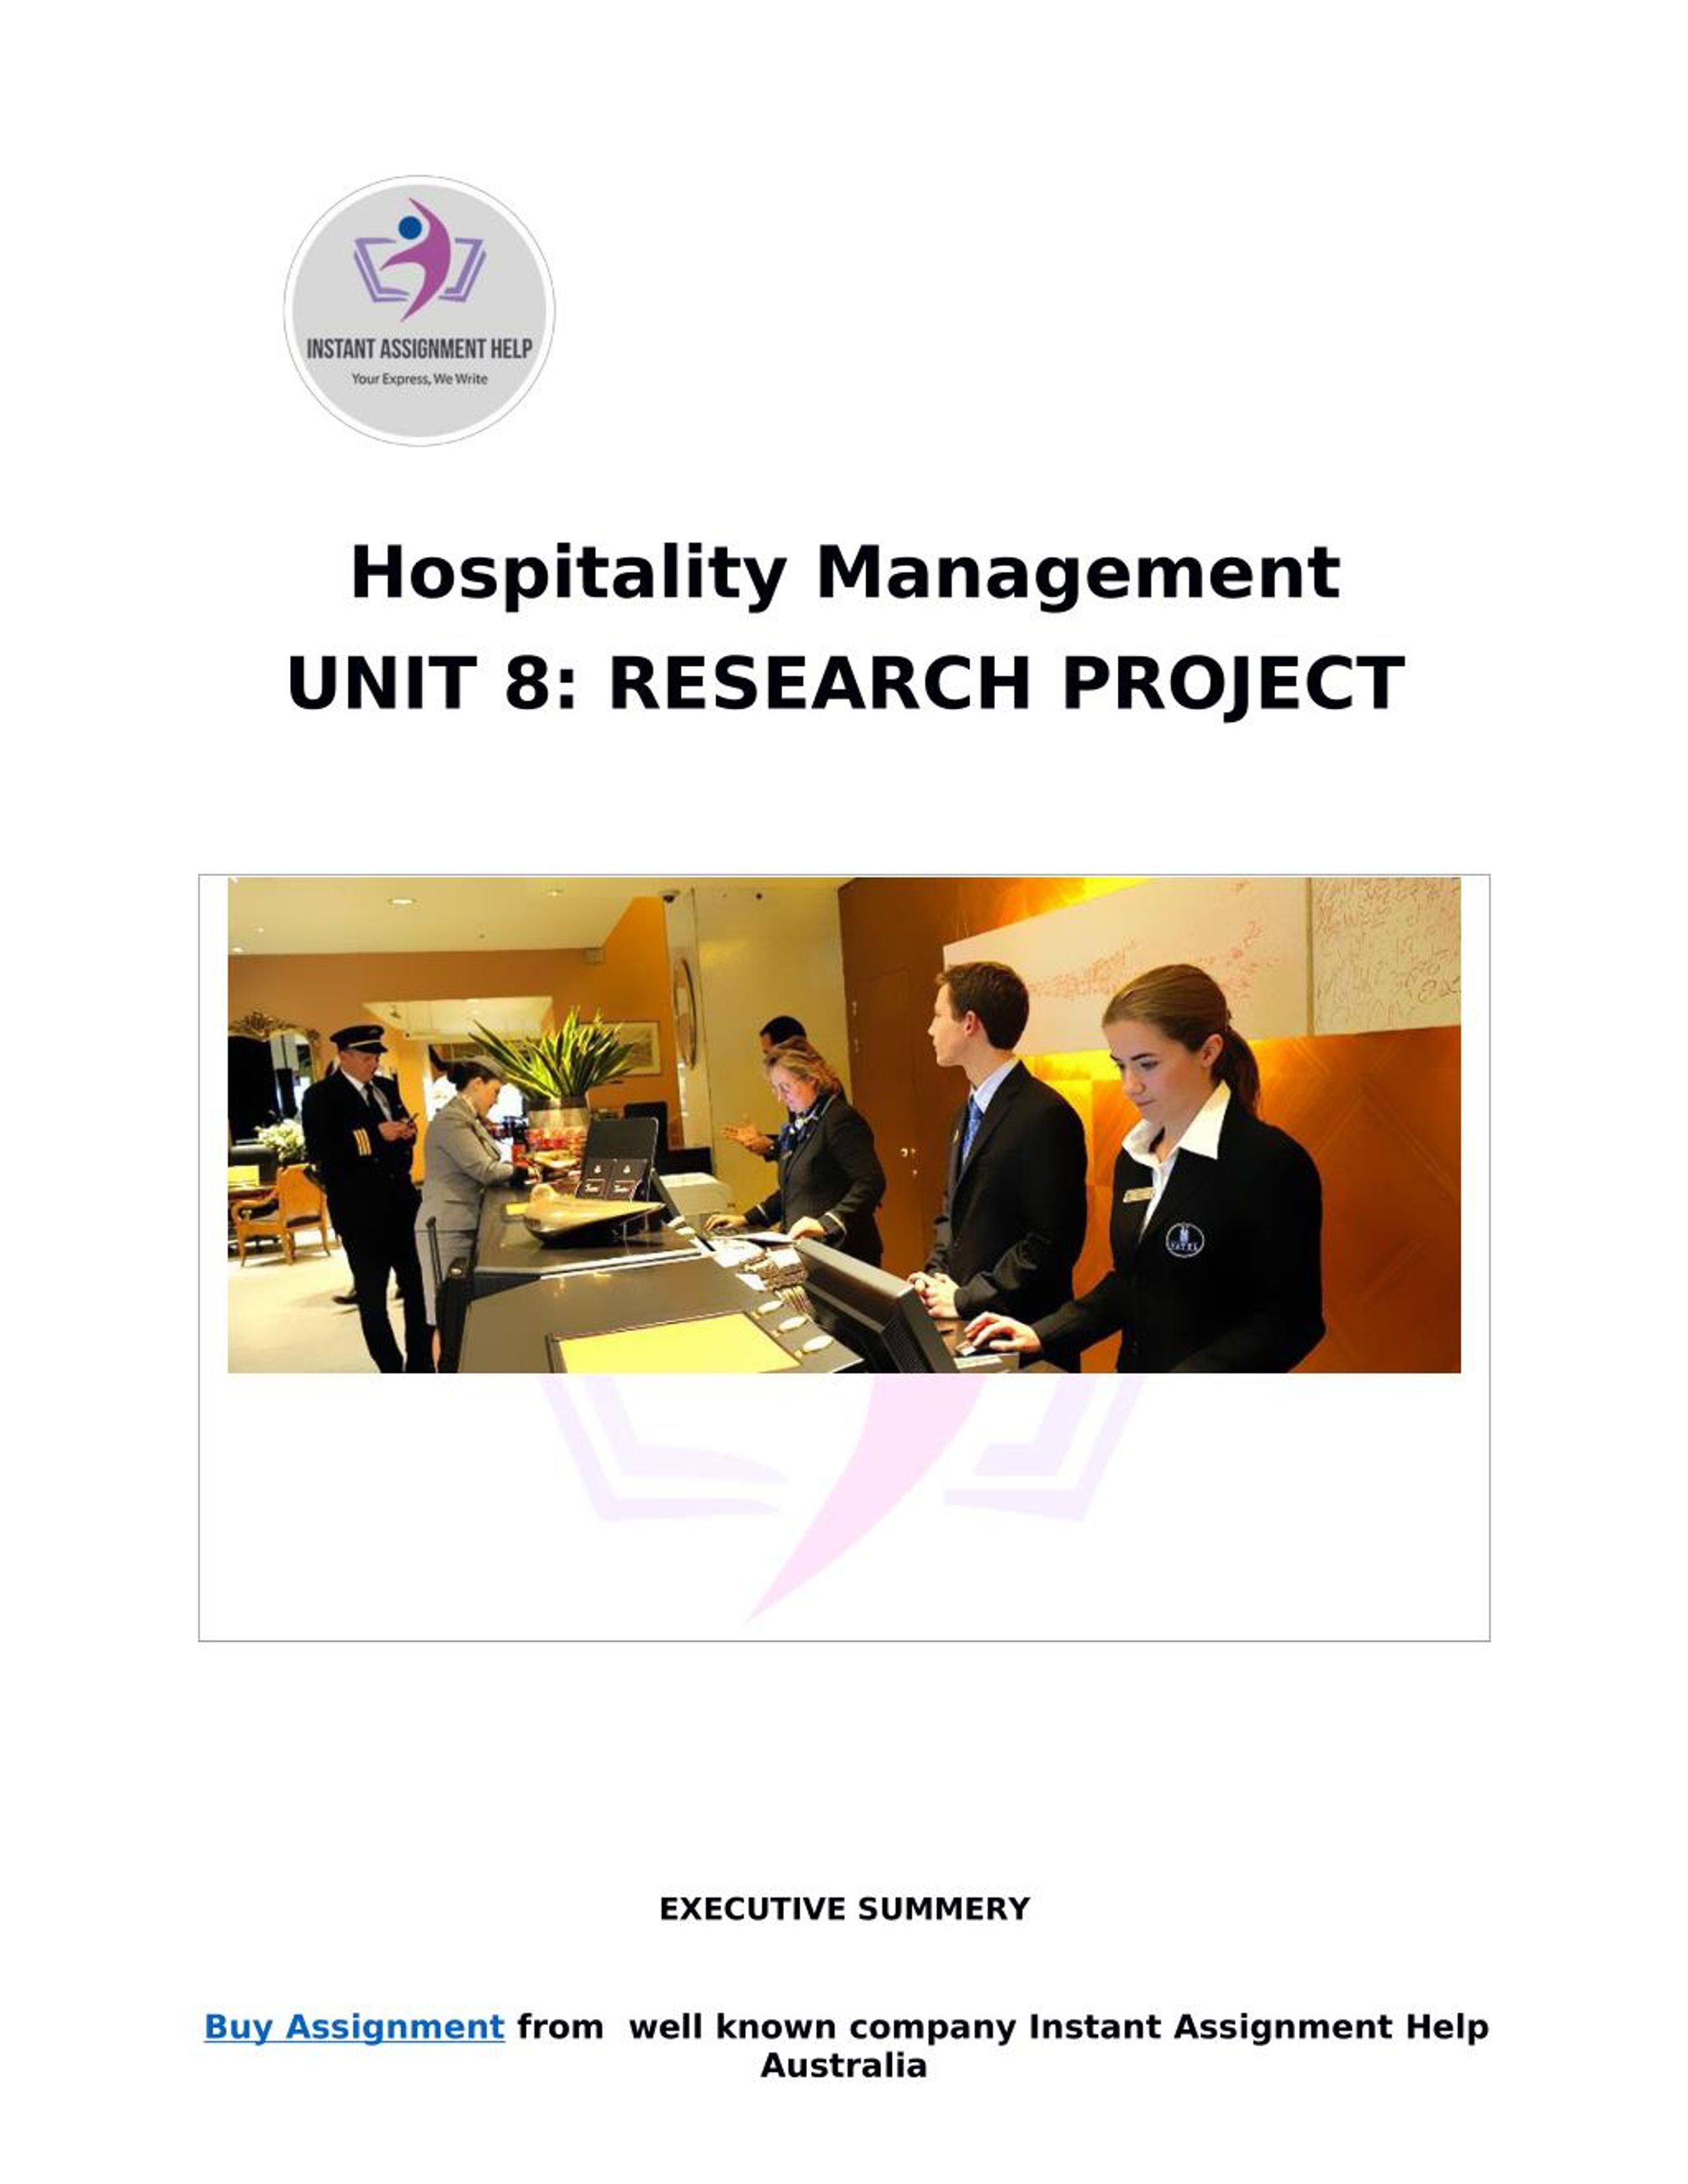 research projects in hospitality